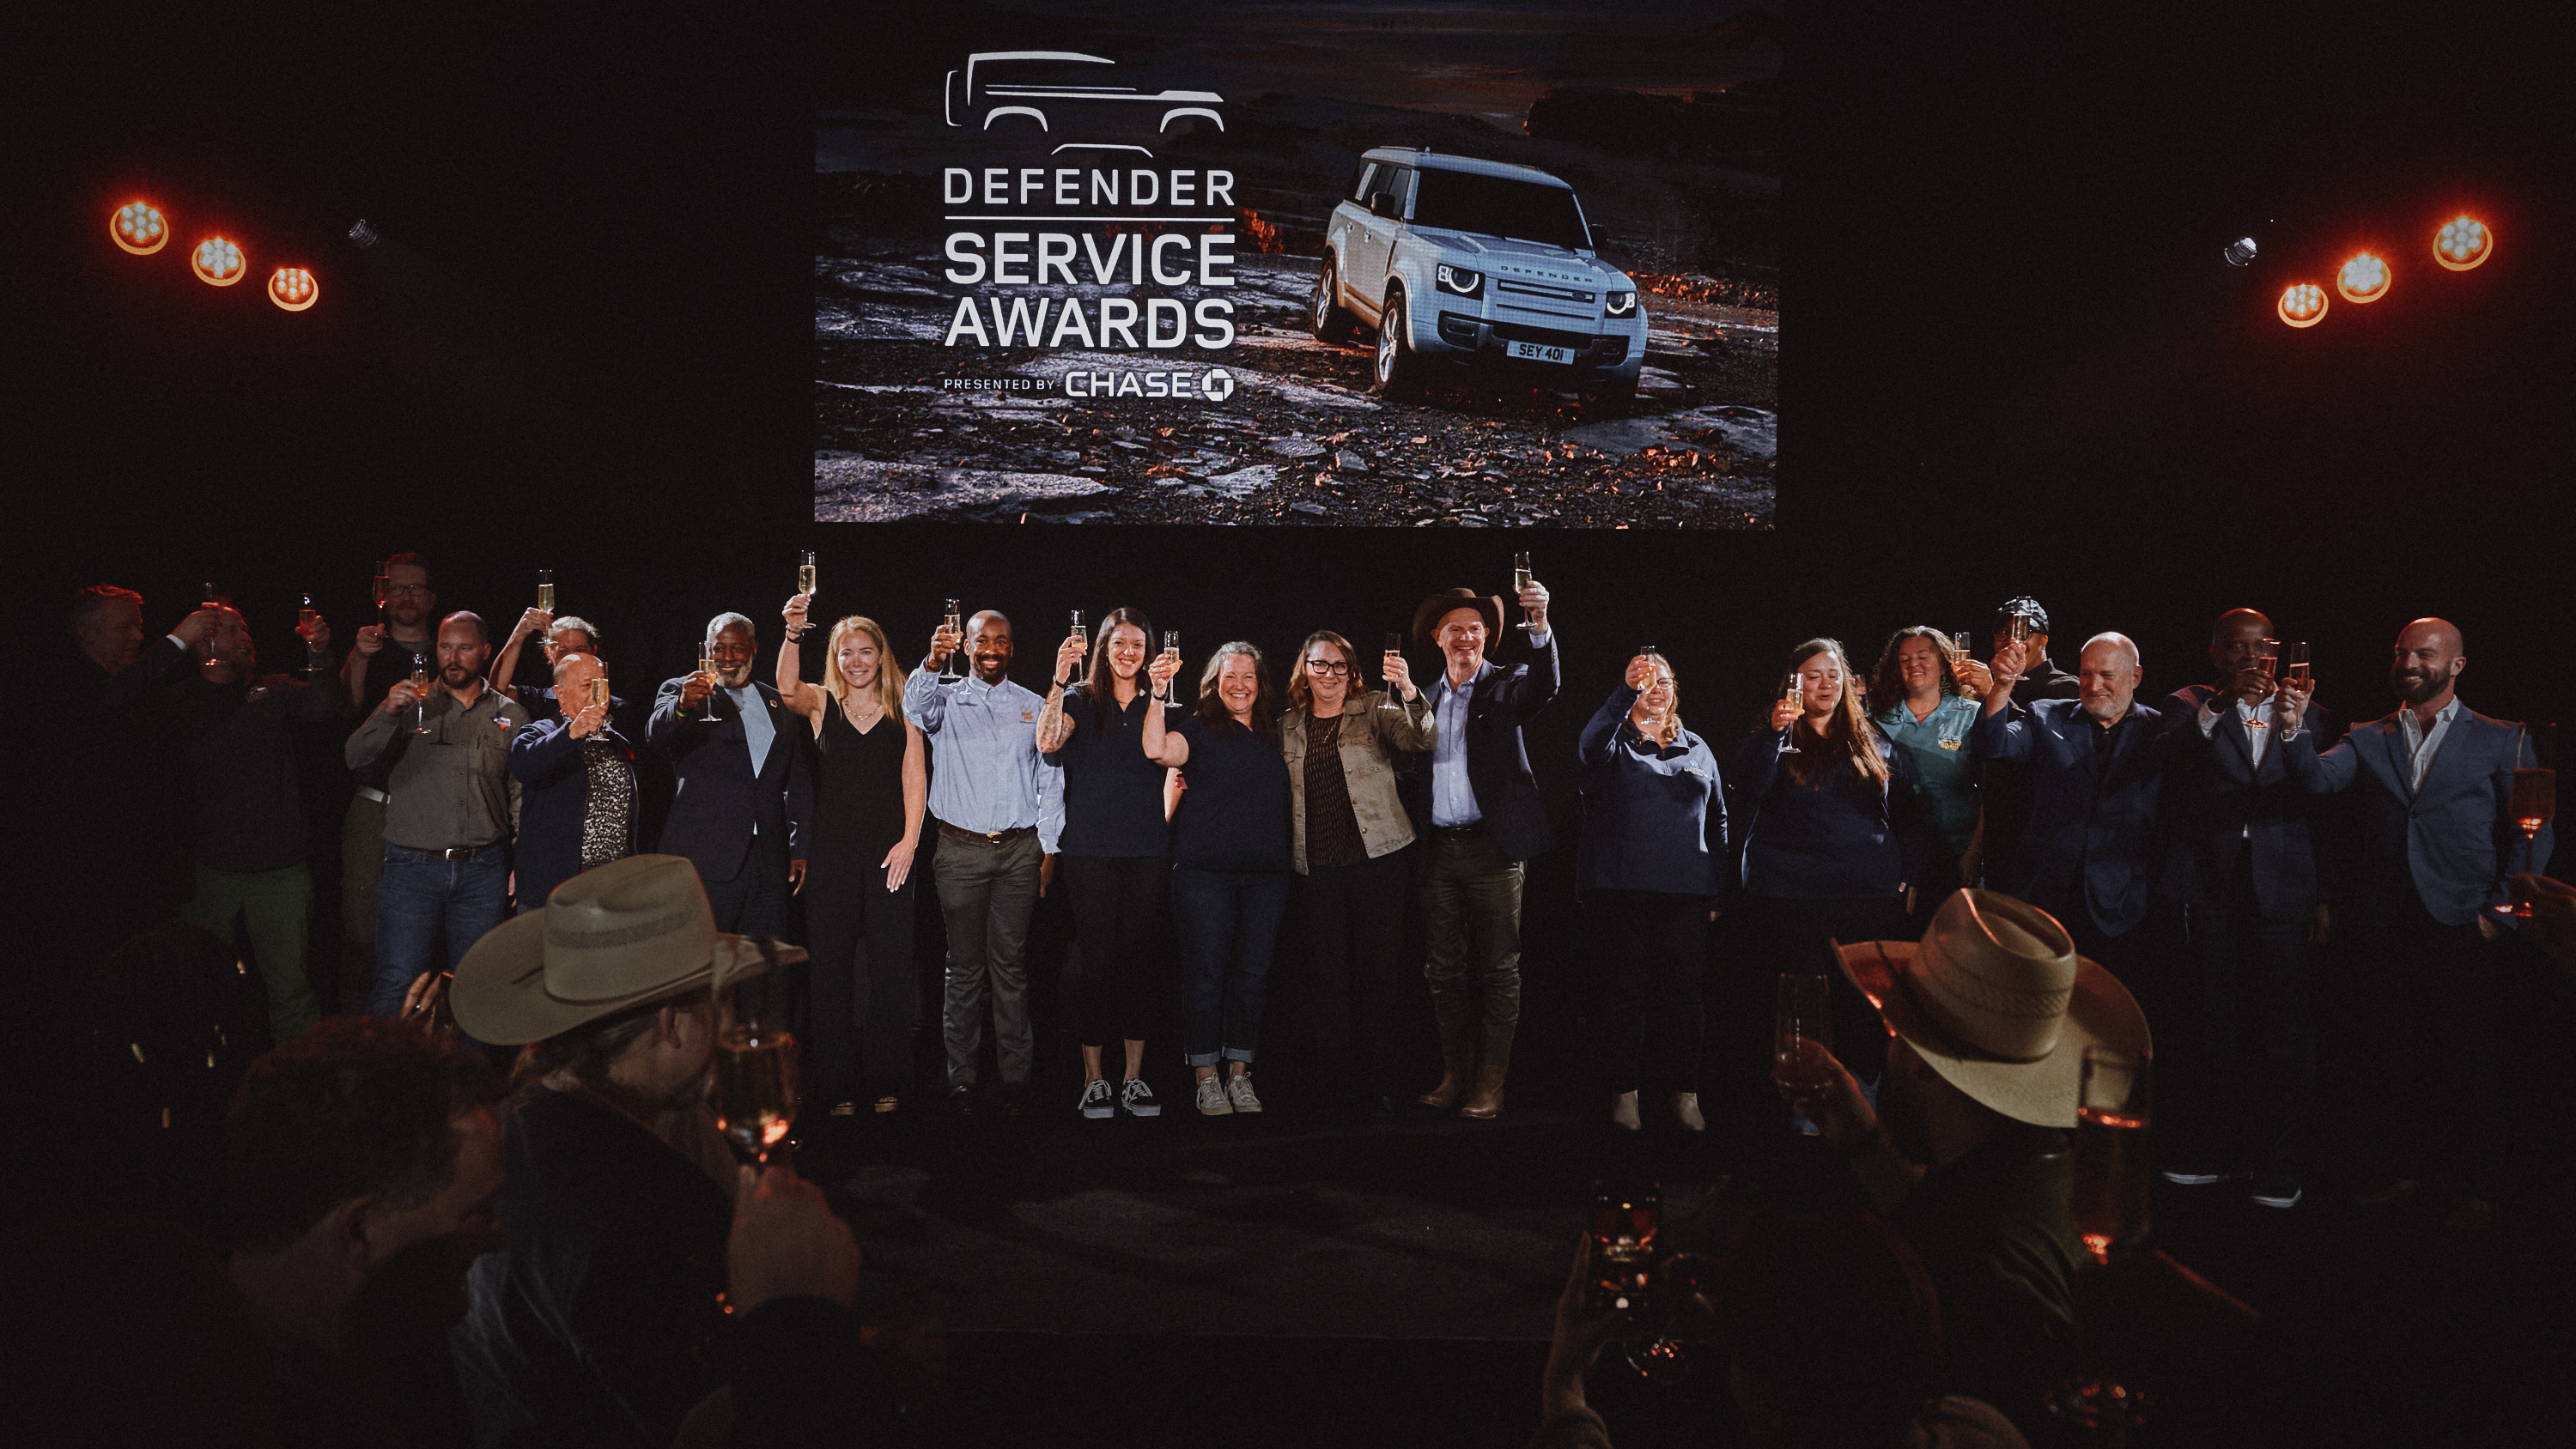 Defender Service Awards Announced in Somerville, Texas